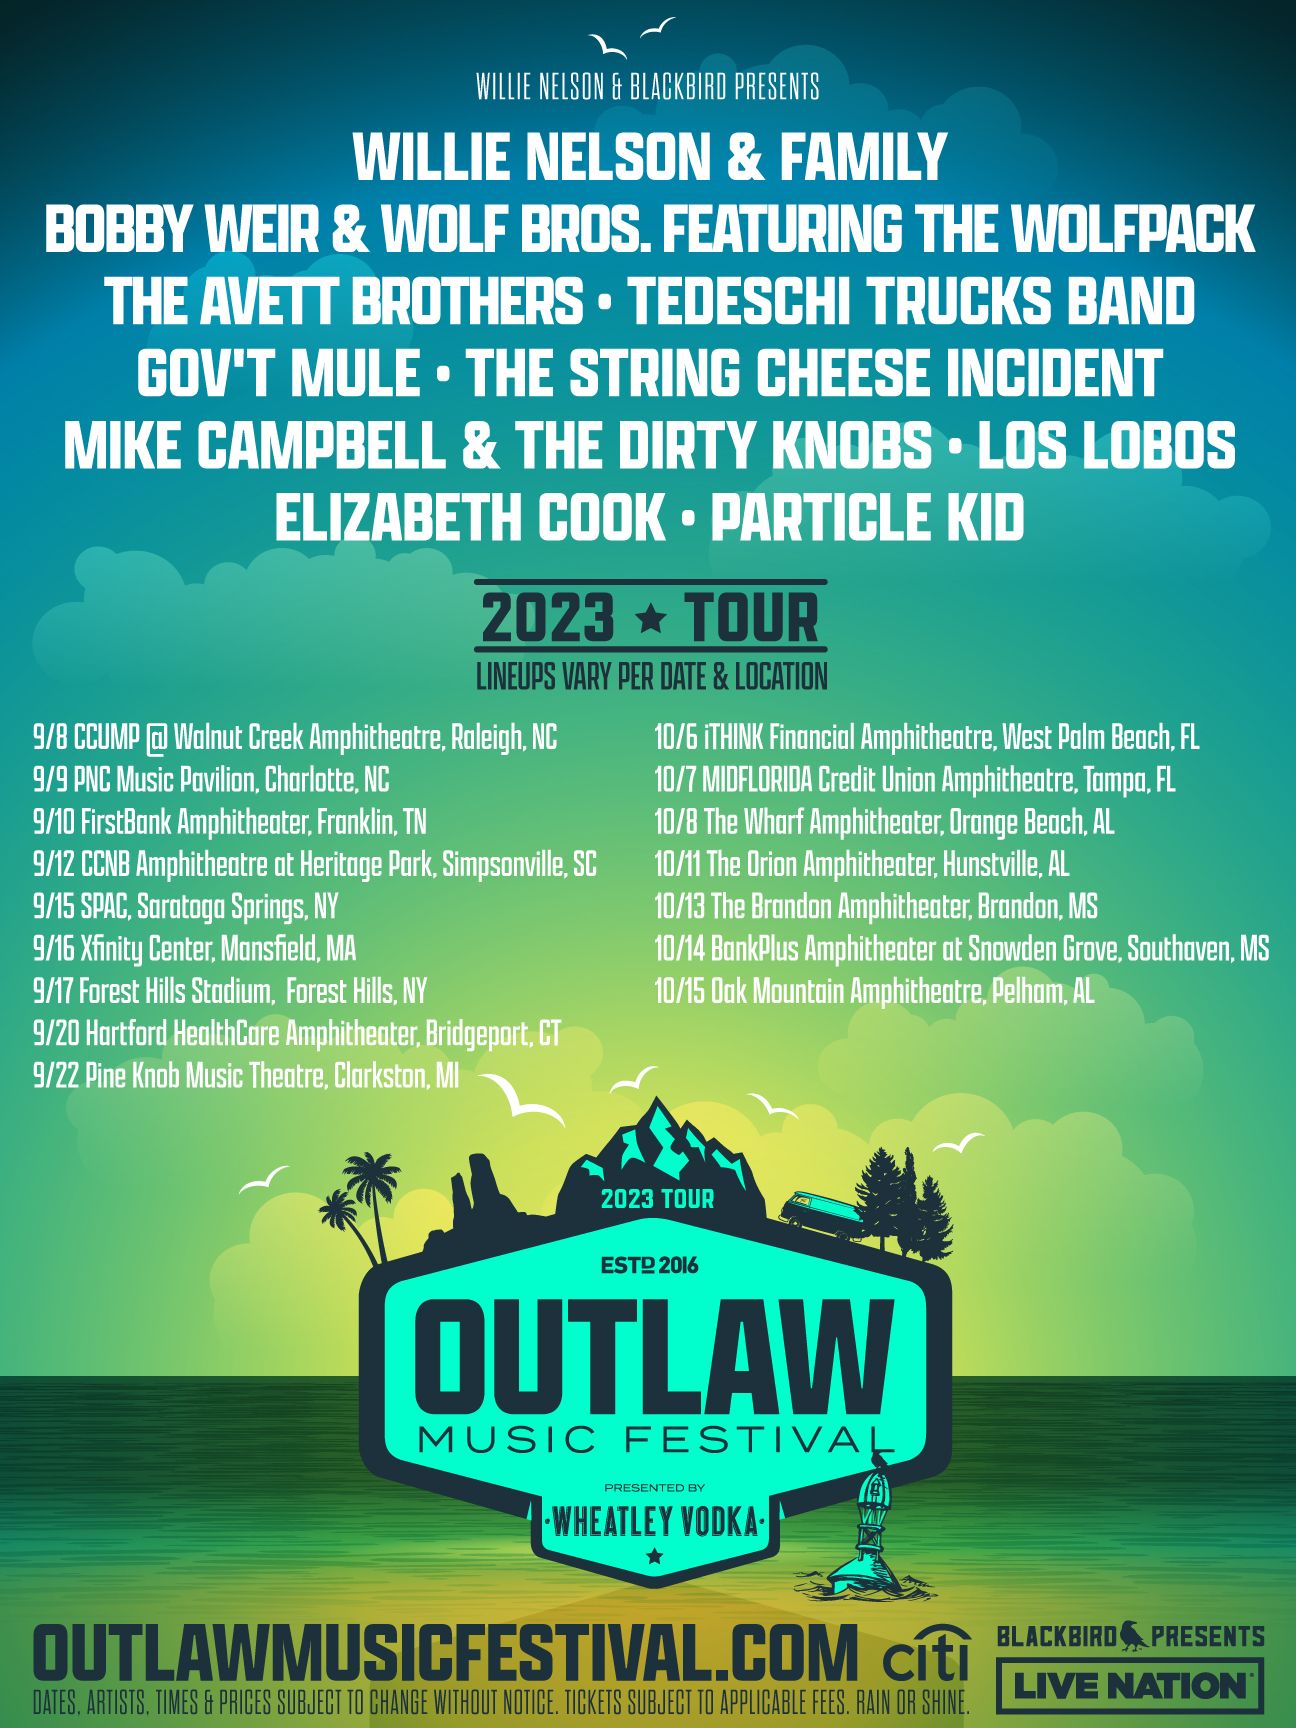 WILLIE NELSON’S ICONIC OUTLAW MUSIC FESTIVAL TOUR ANNOUNCES ADDITIONAL